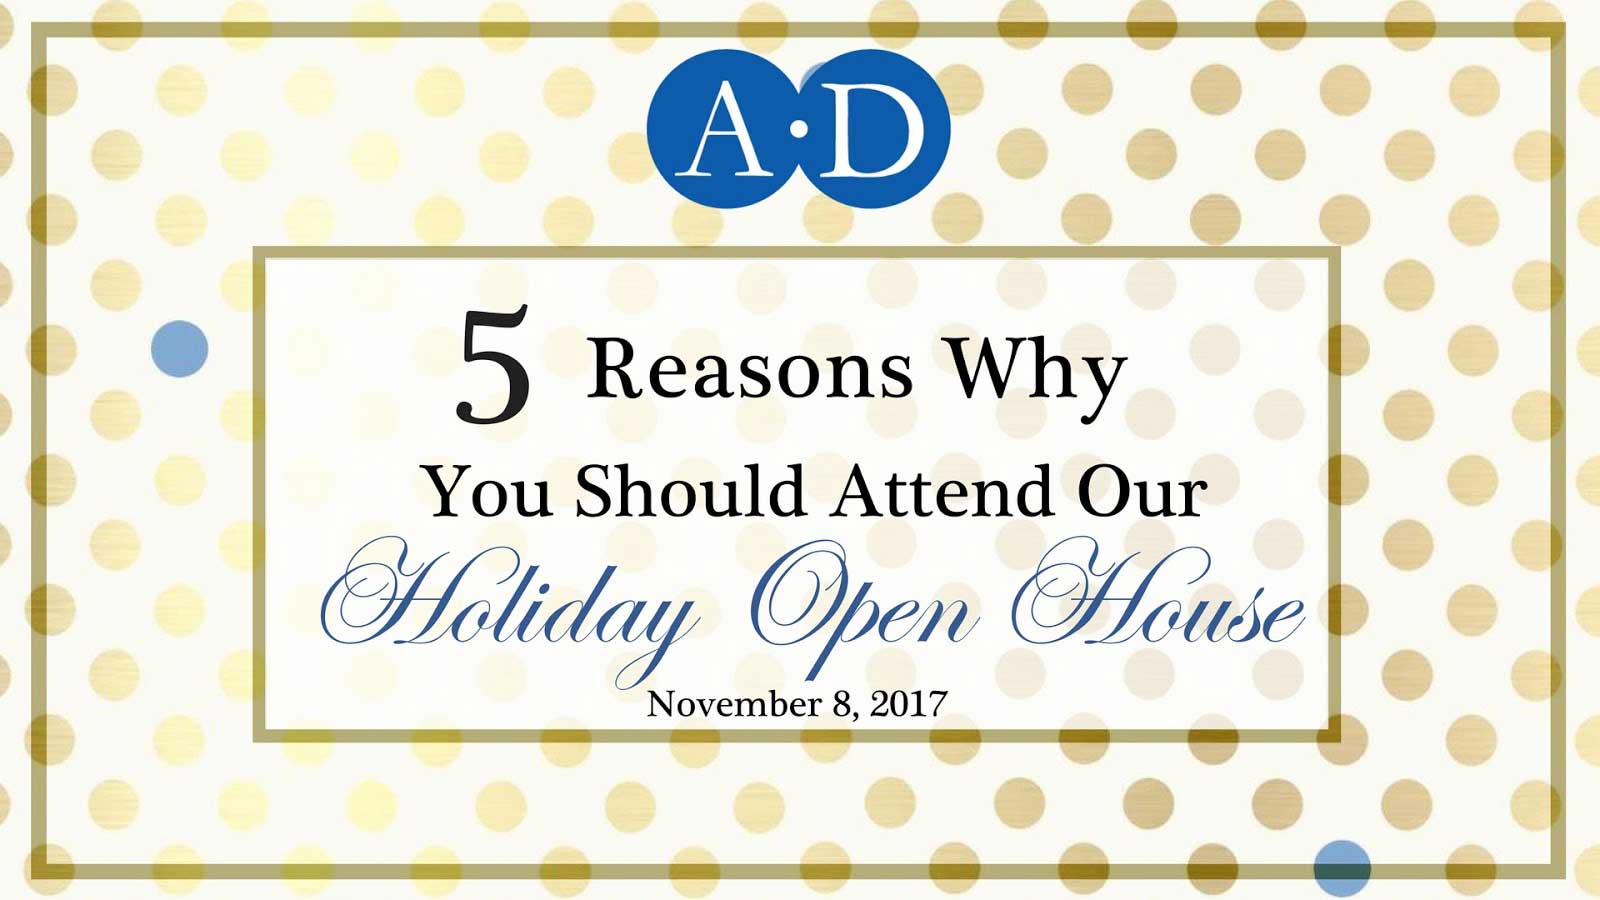 5 Reasons Why You Should Join Us Nov 8 At Aesthetic Dermatology